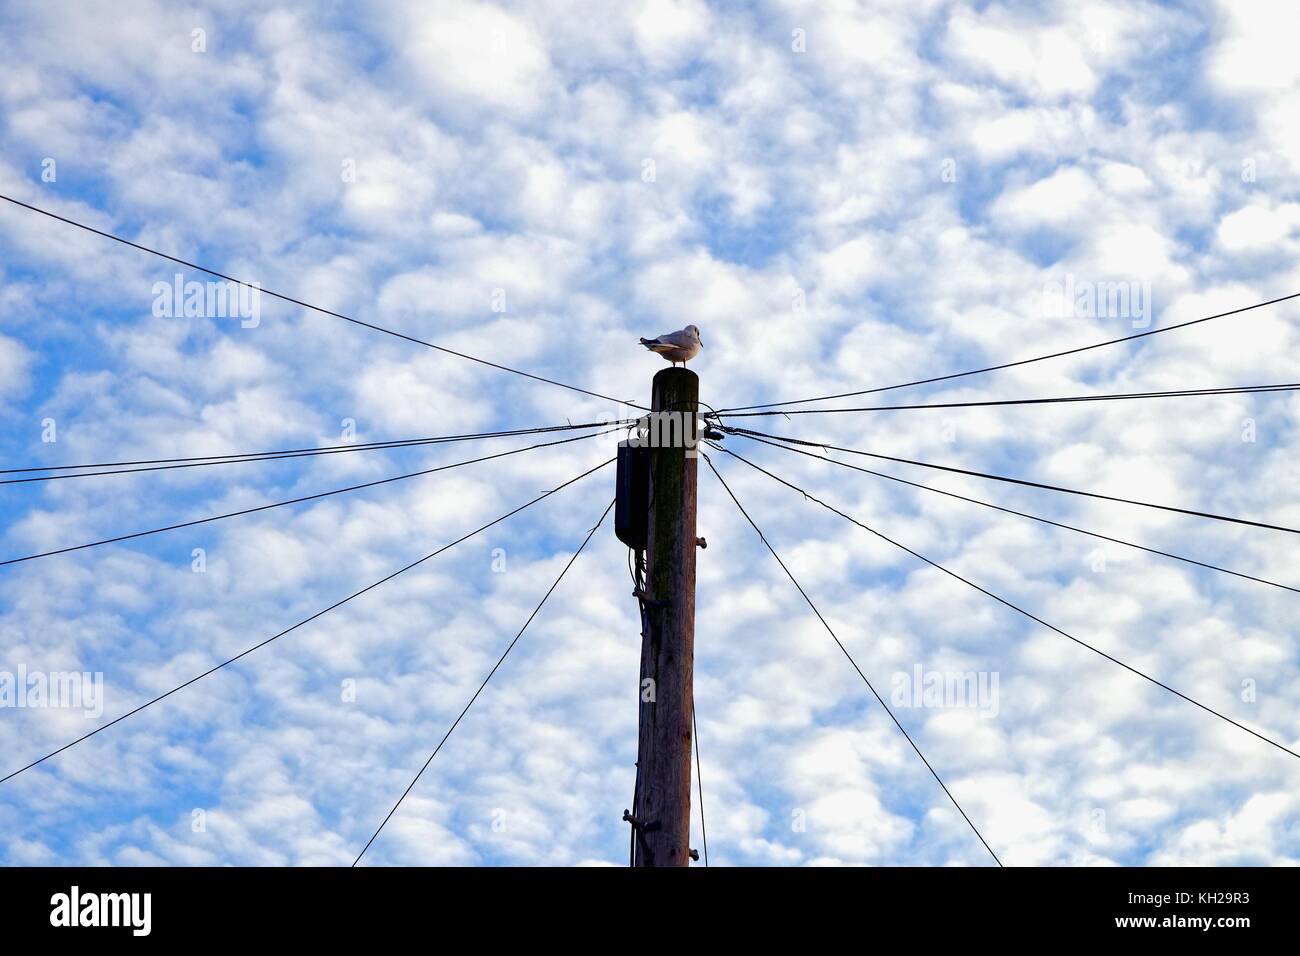 Bird sitting on top of a British telecom telegraph pole against a background of a mackerel sky Stock Photo